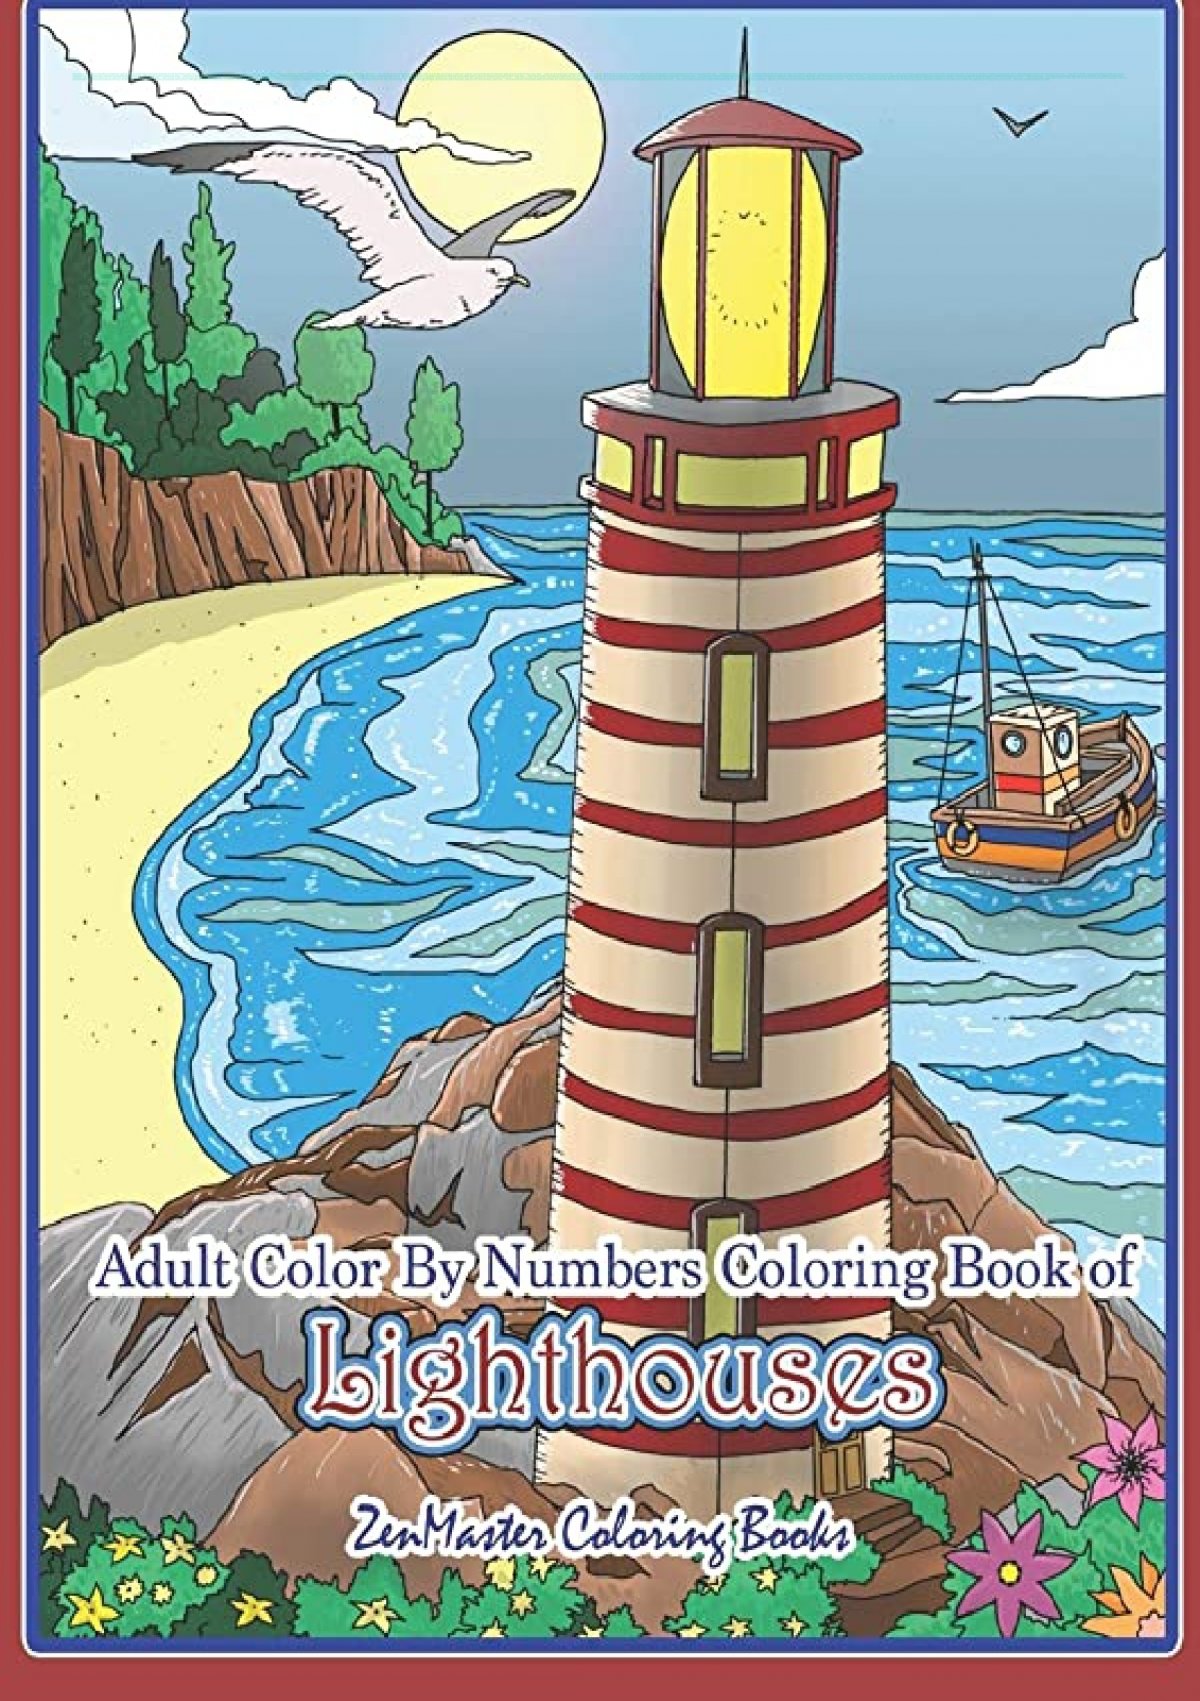 pdf-adult-color-by-numbers-coloring-book-of-lighthouses-lighthouse